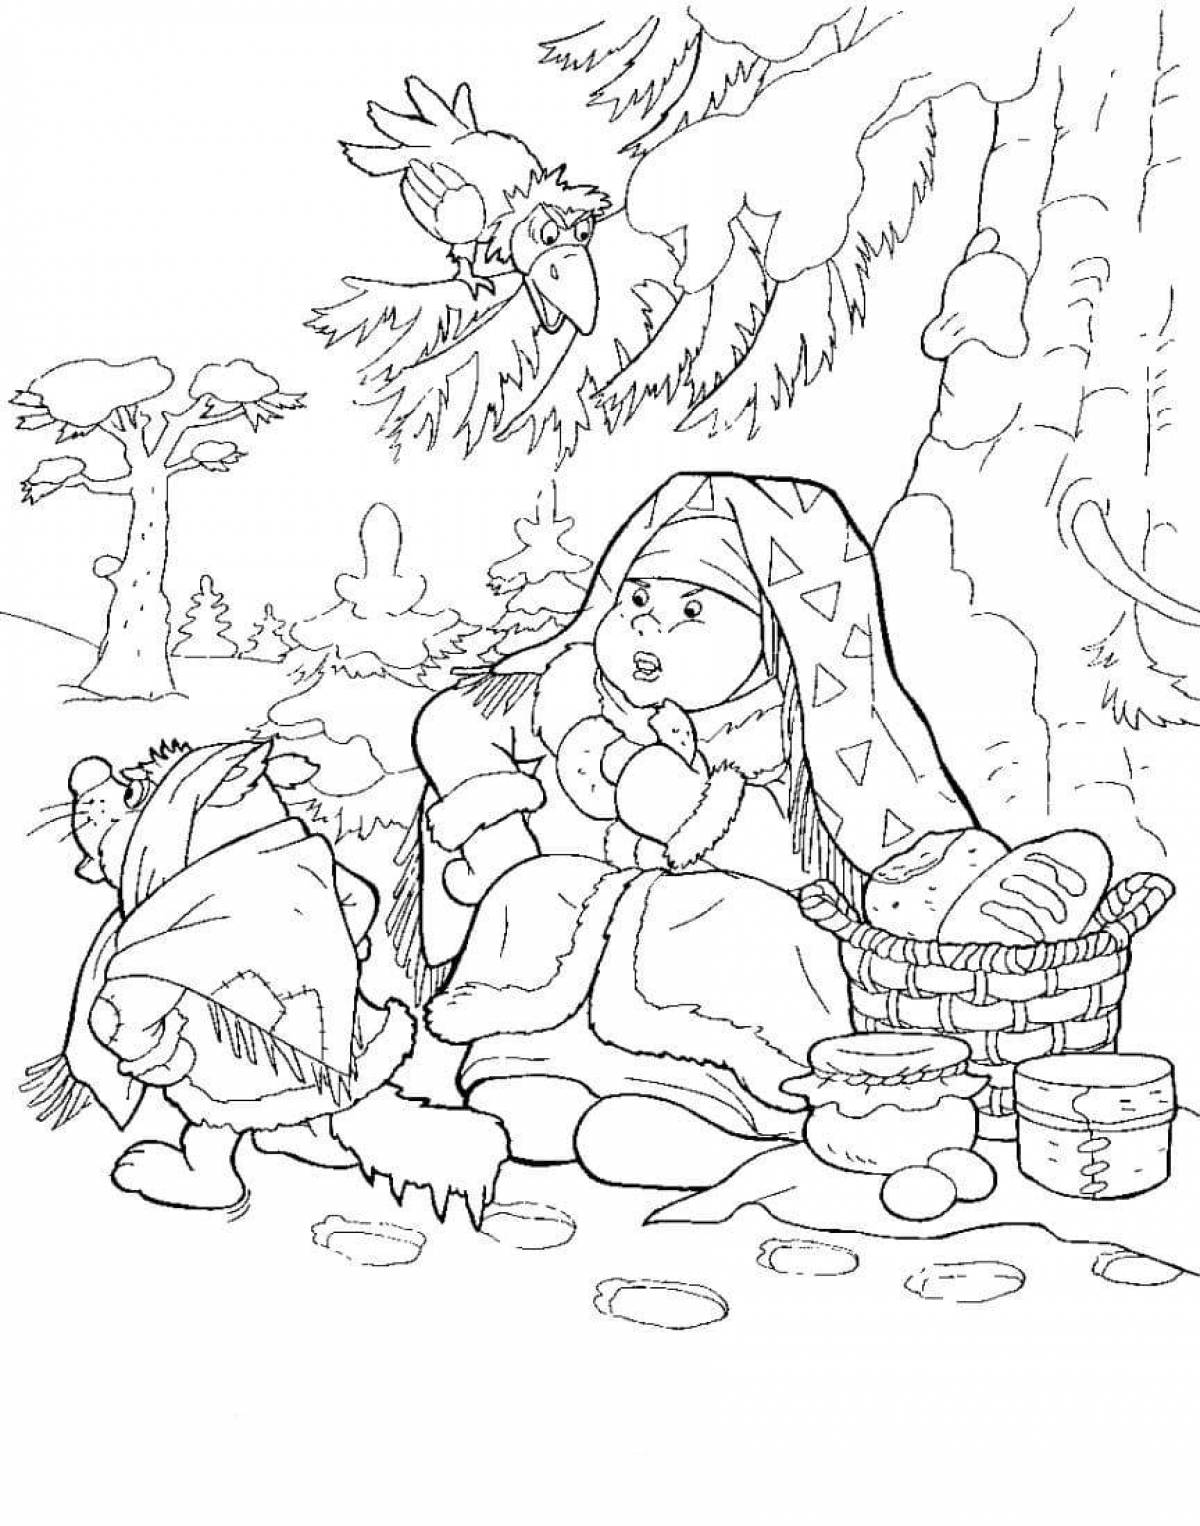 Incredible coloring book for the fairy tale Moroz Ivanovich